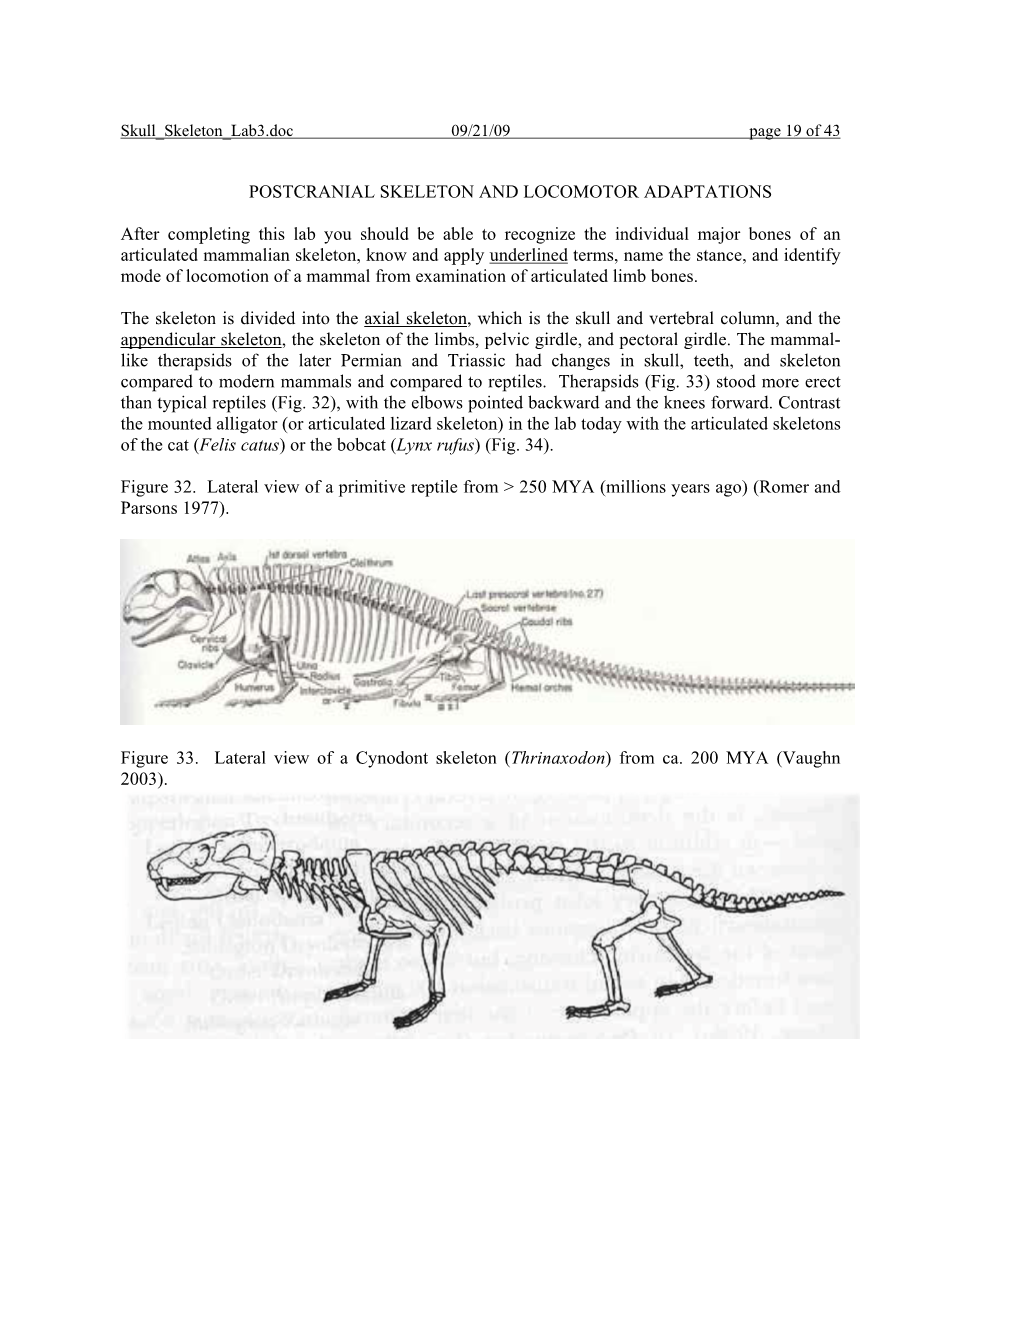 POSTCRANIAL SKELETON and LOCOMOTOR ADAPTATIONS After Completing This Lab You Should Be Able to Recognize the Individual Major Bo